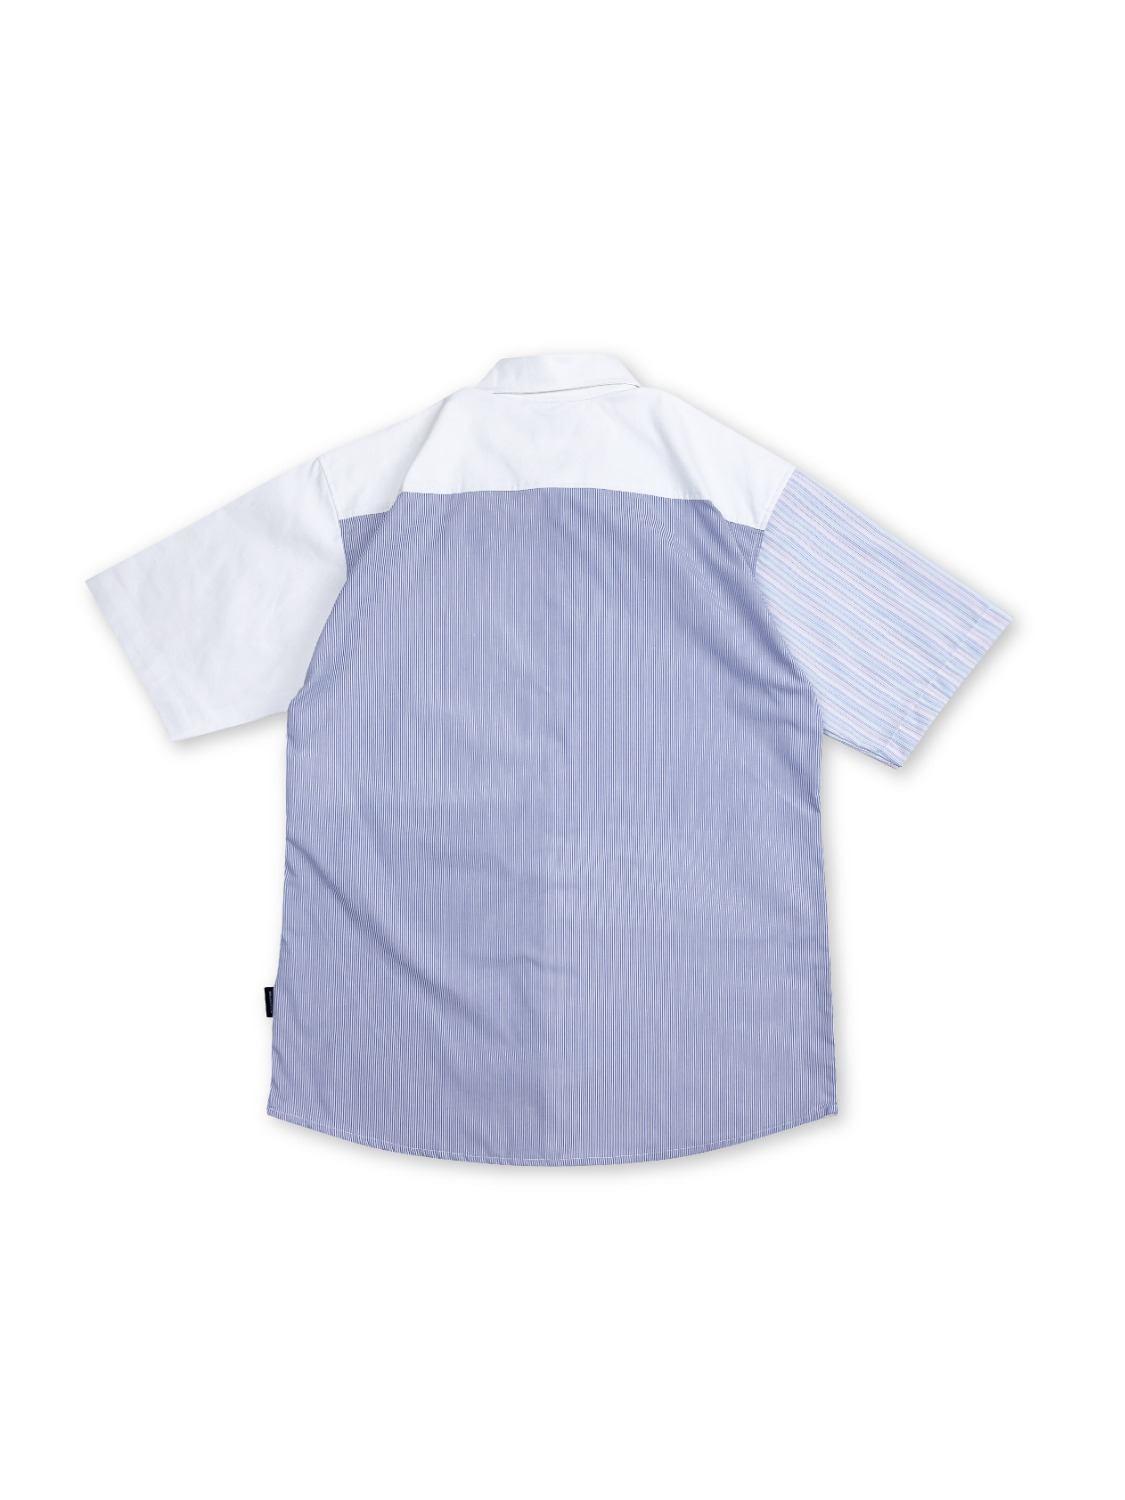 SW Striped Mixed S/S Shirt (Multicolor)